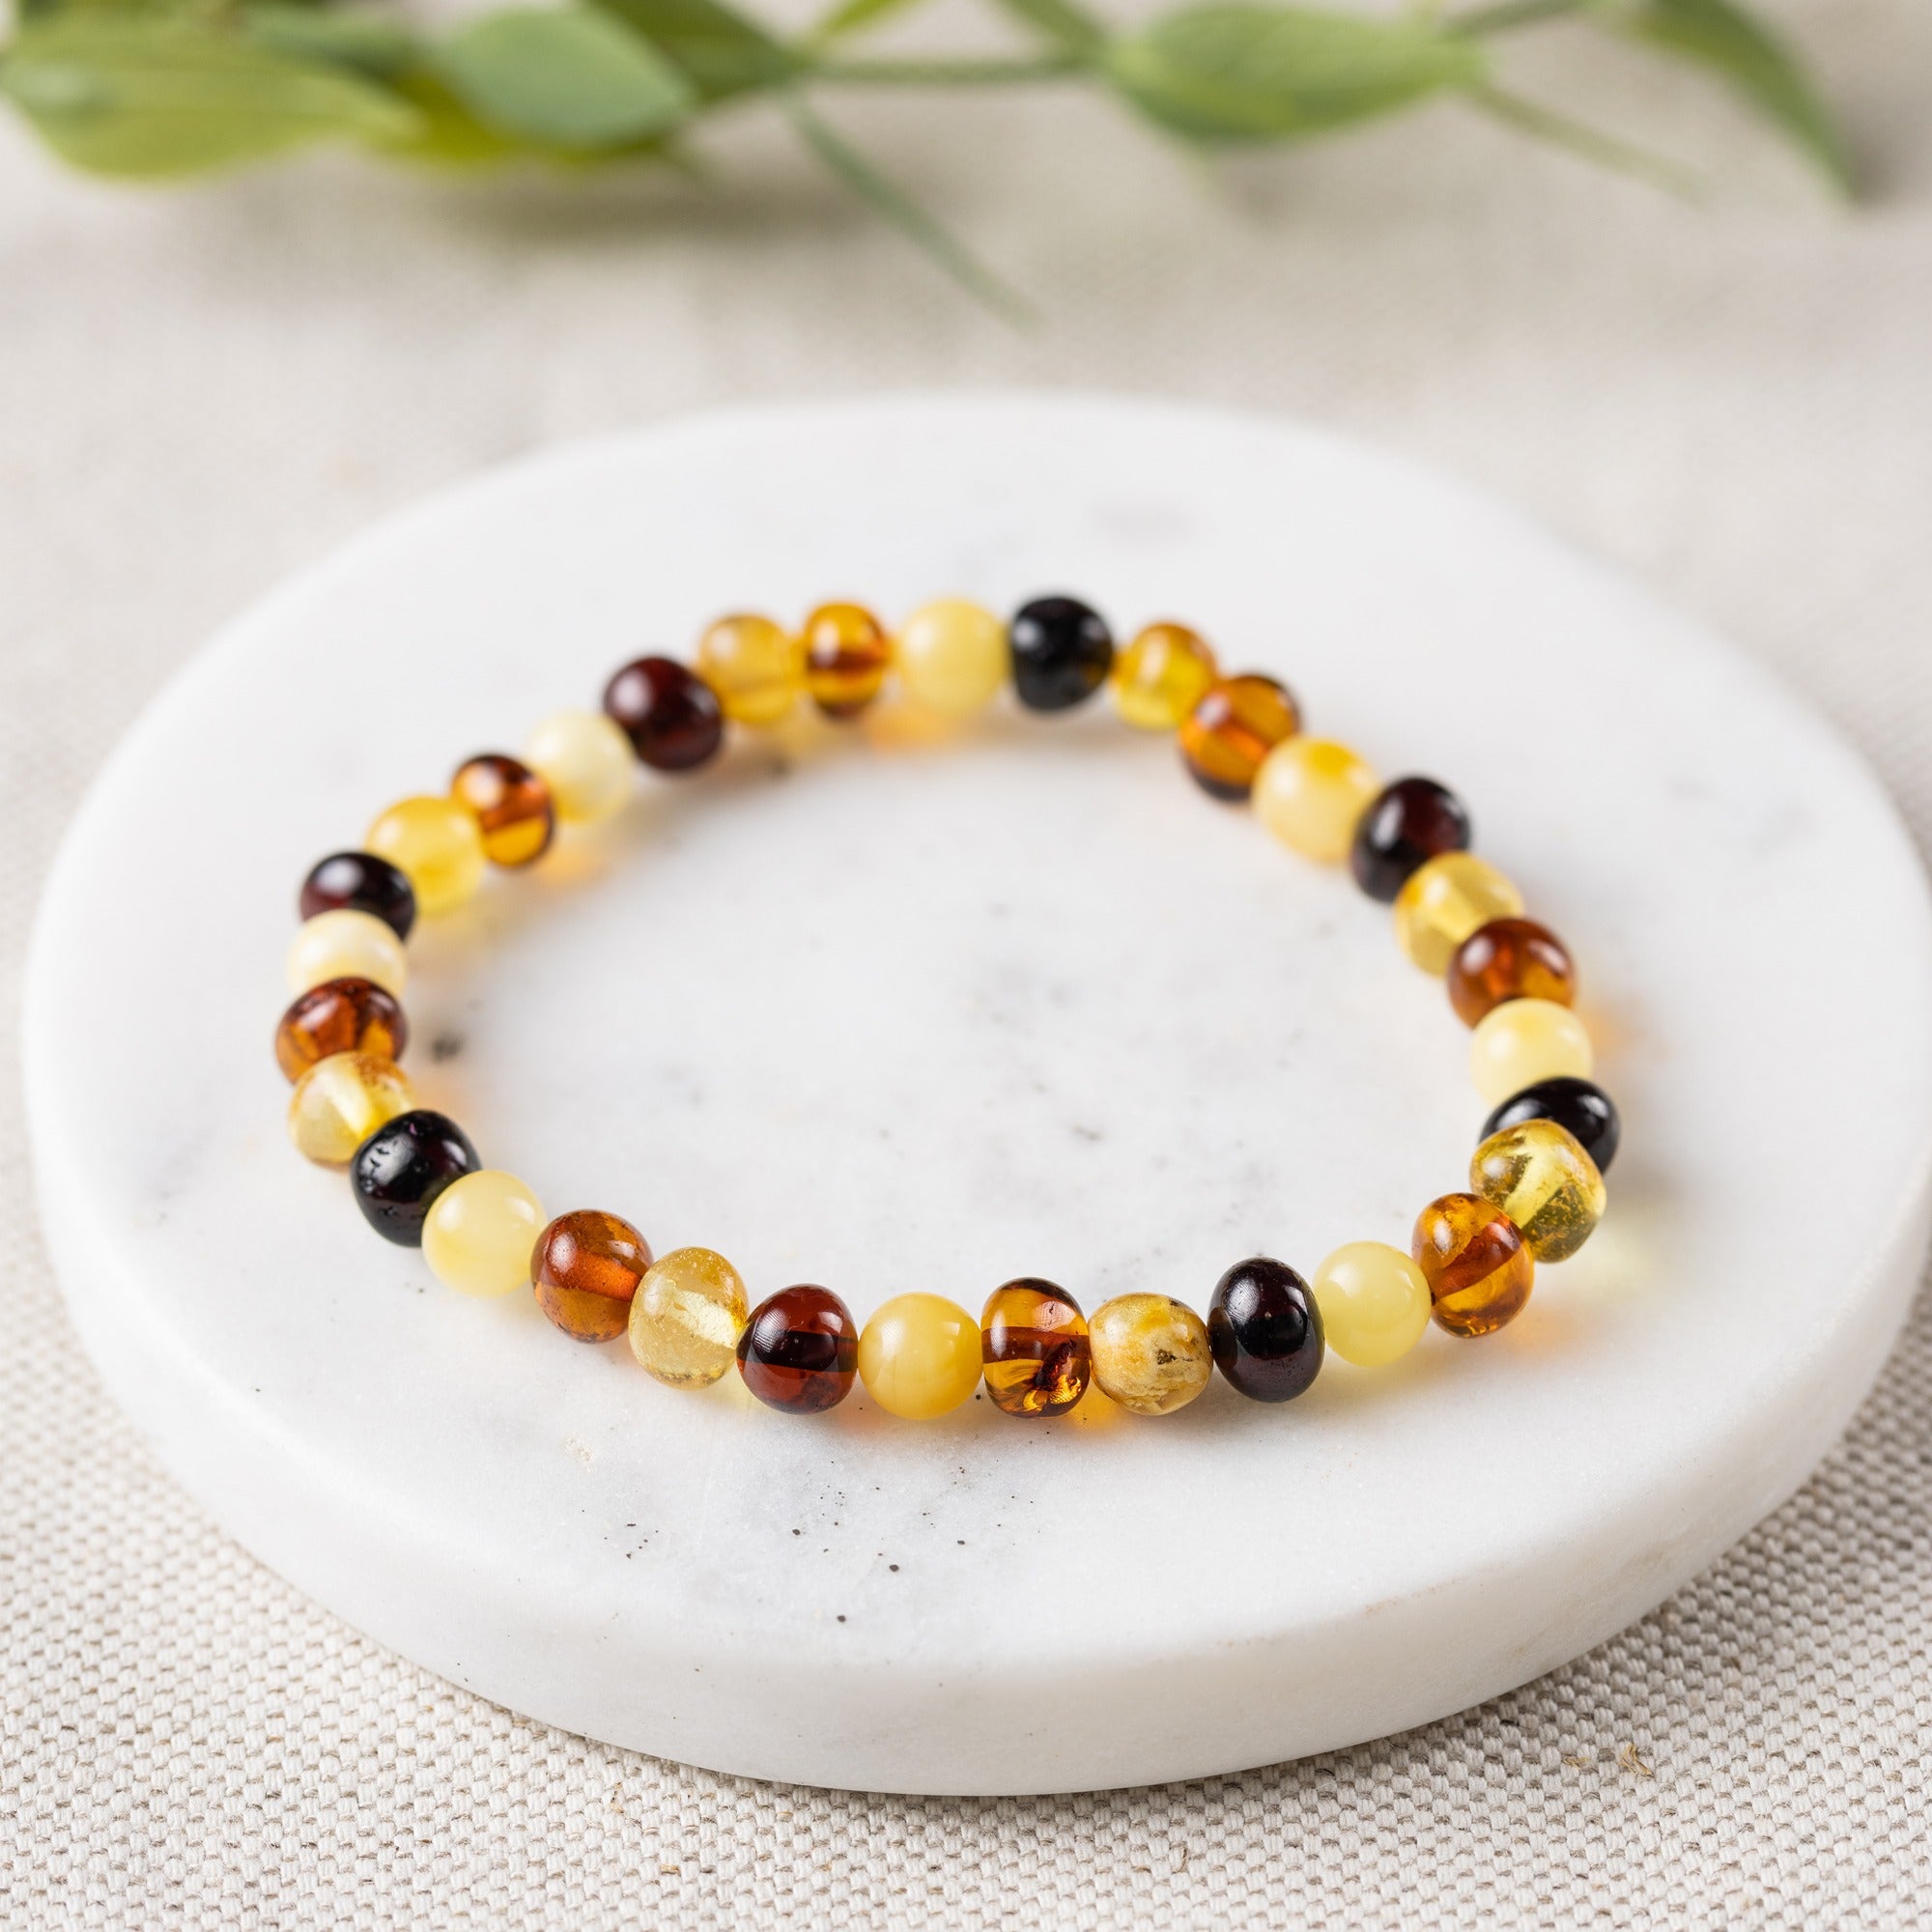 Our Baltic Amber - Polyanna